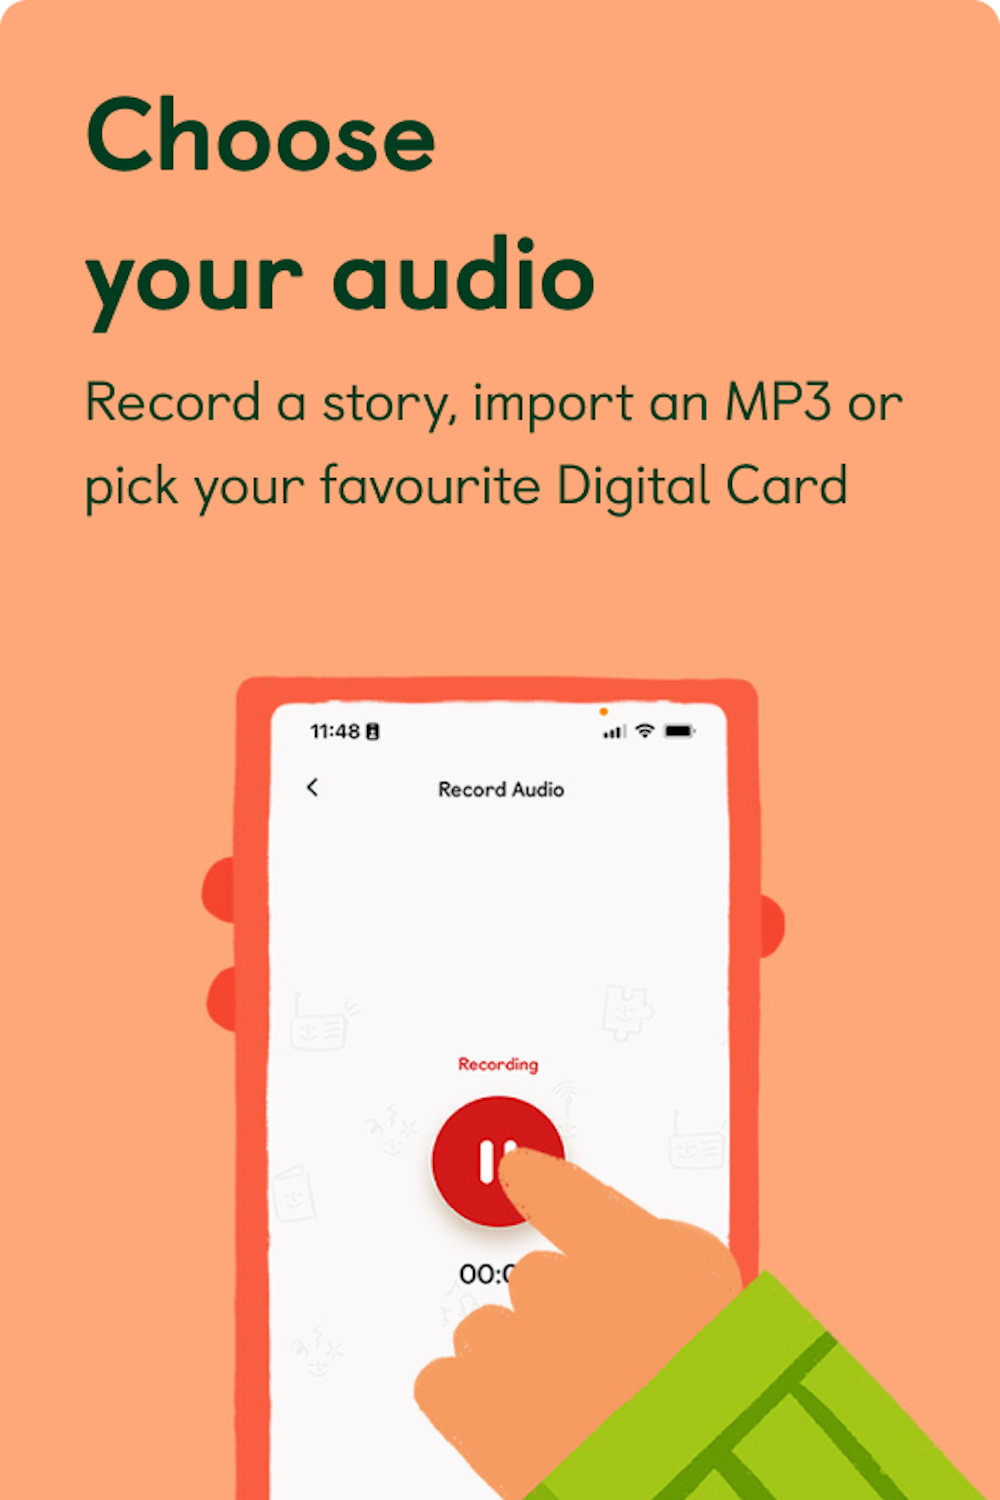 Choose your audio - Record a story, import an MP3 or pick your favourite Digital Card